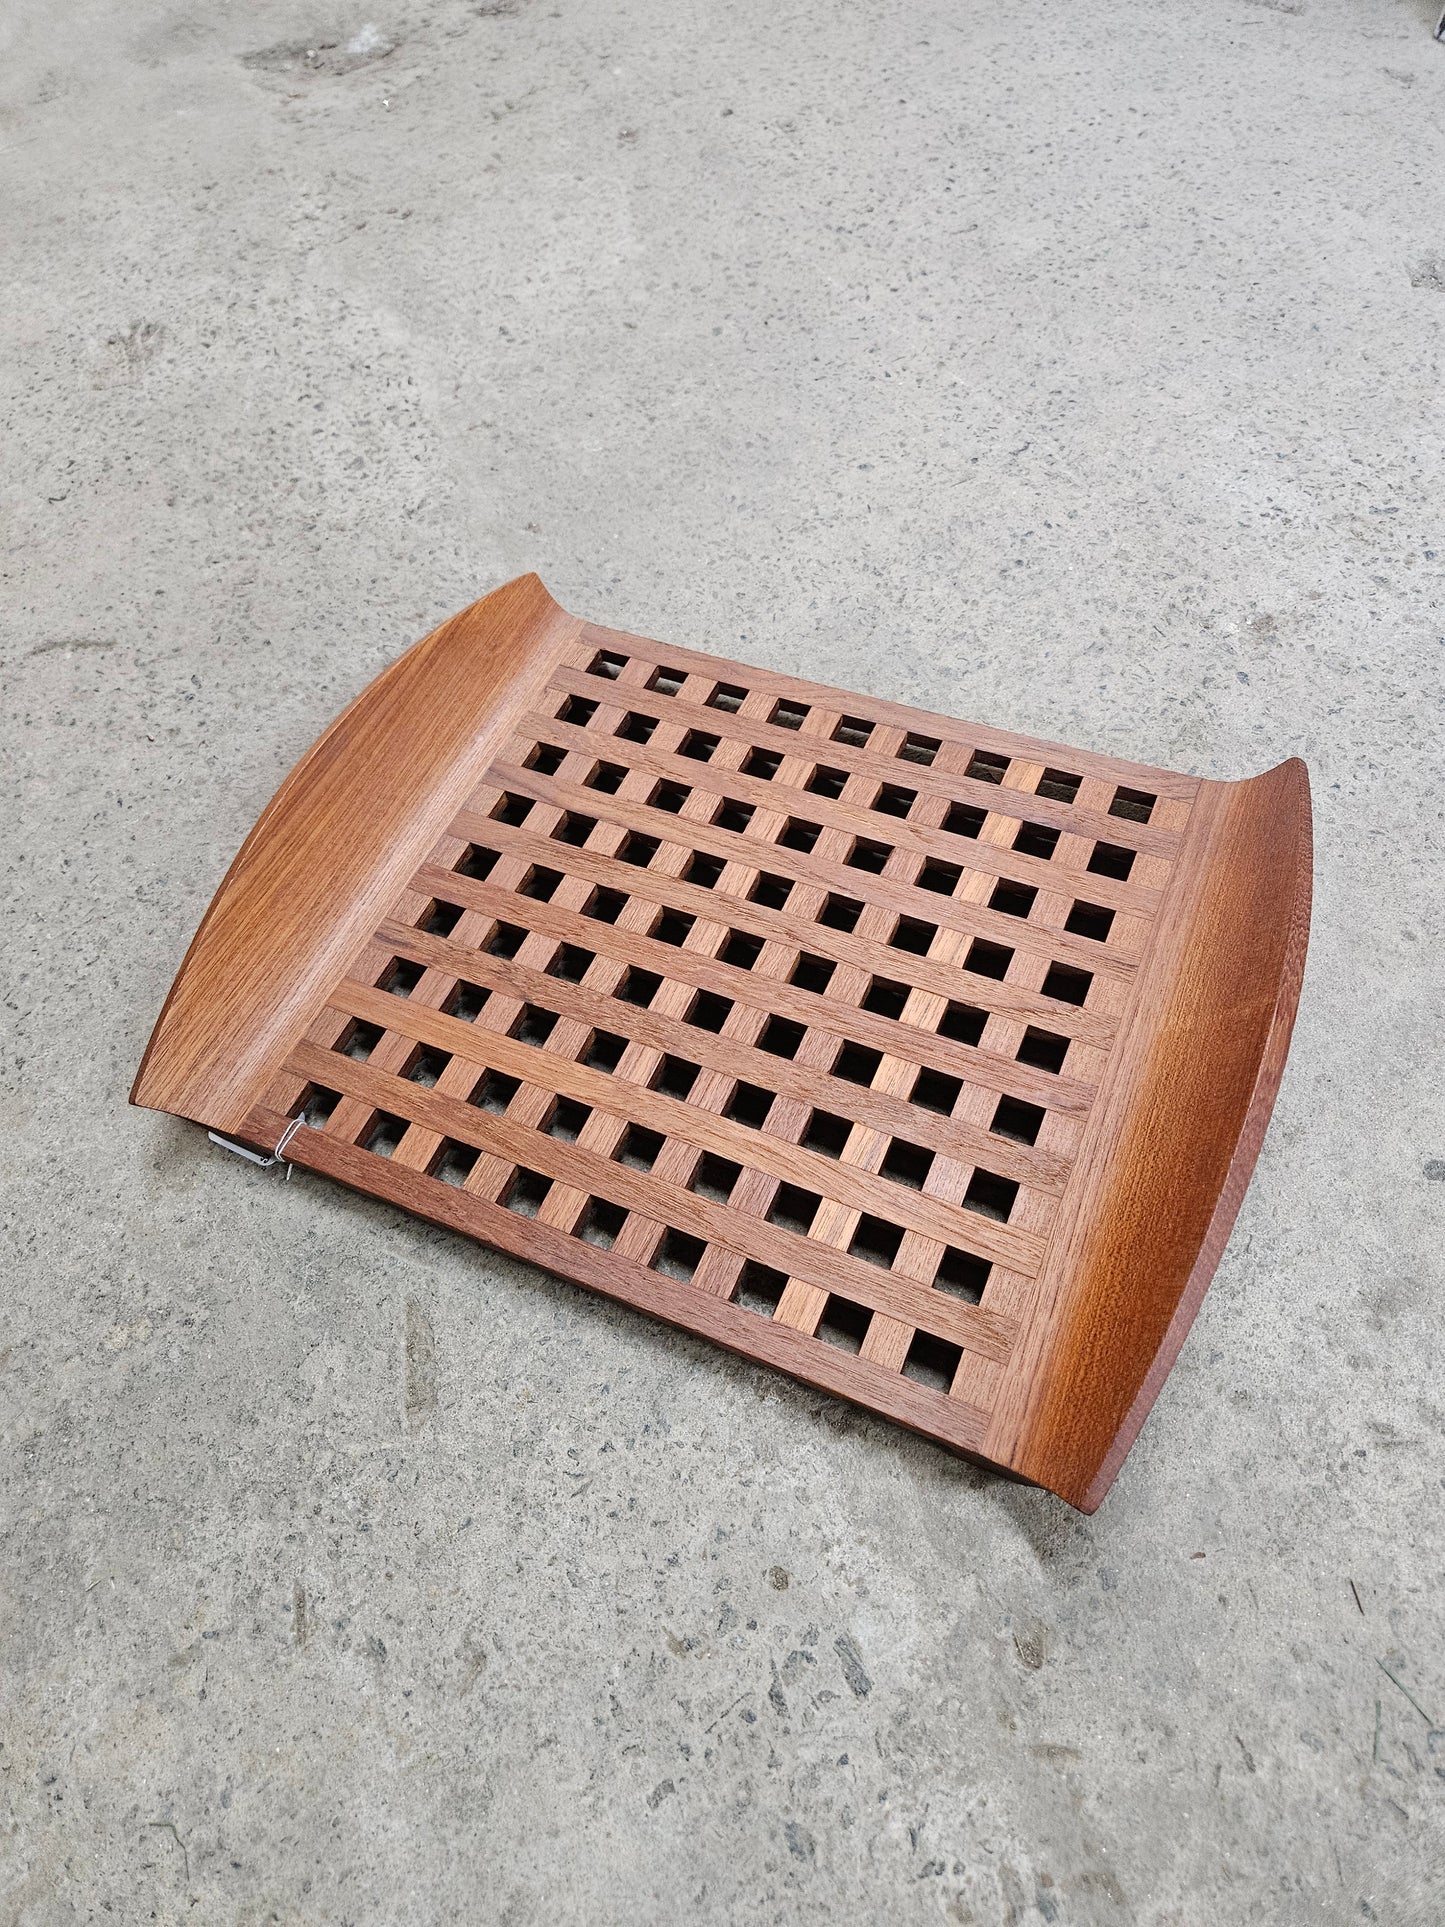 Lattice Serving Tray by Jens Quistgaard